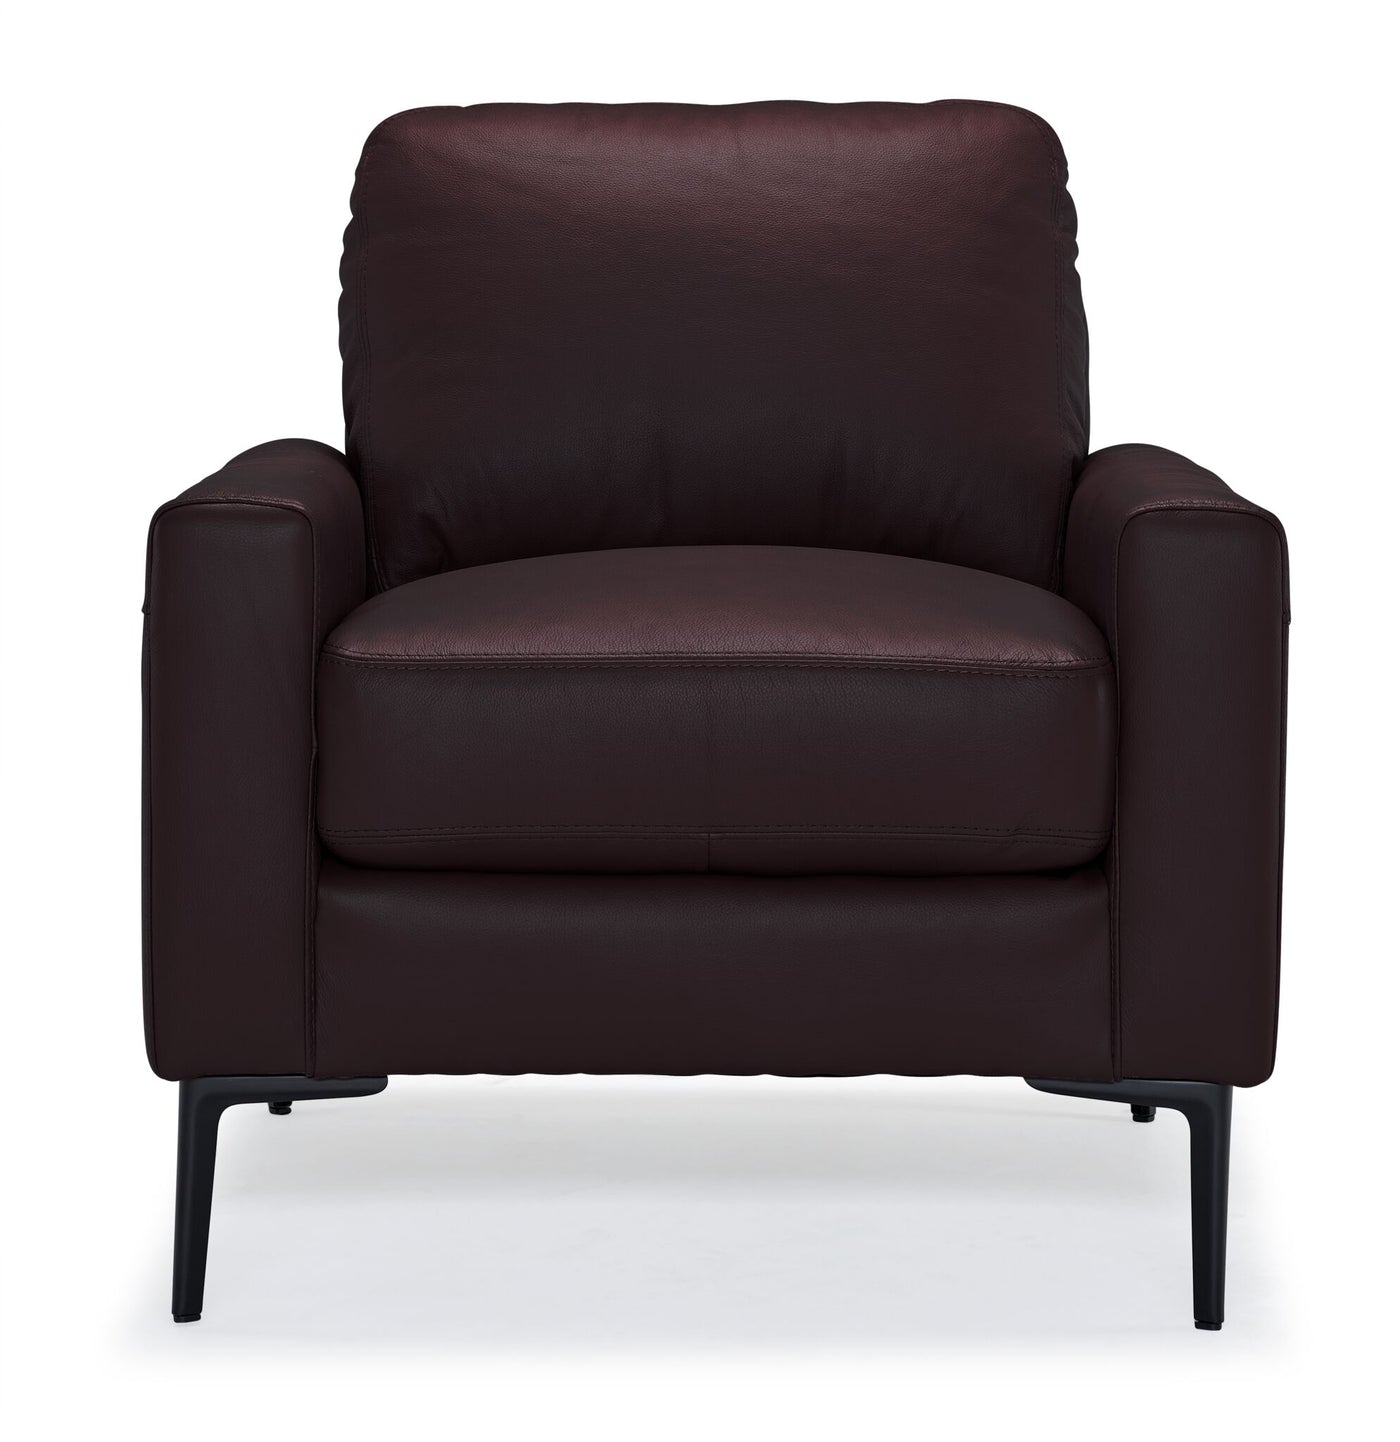 Chito Leather Chair - Mocha